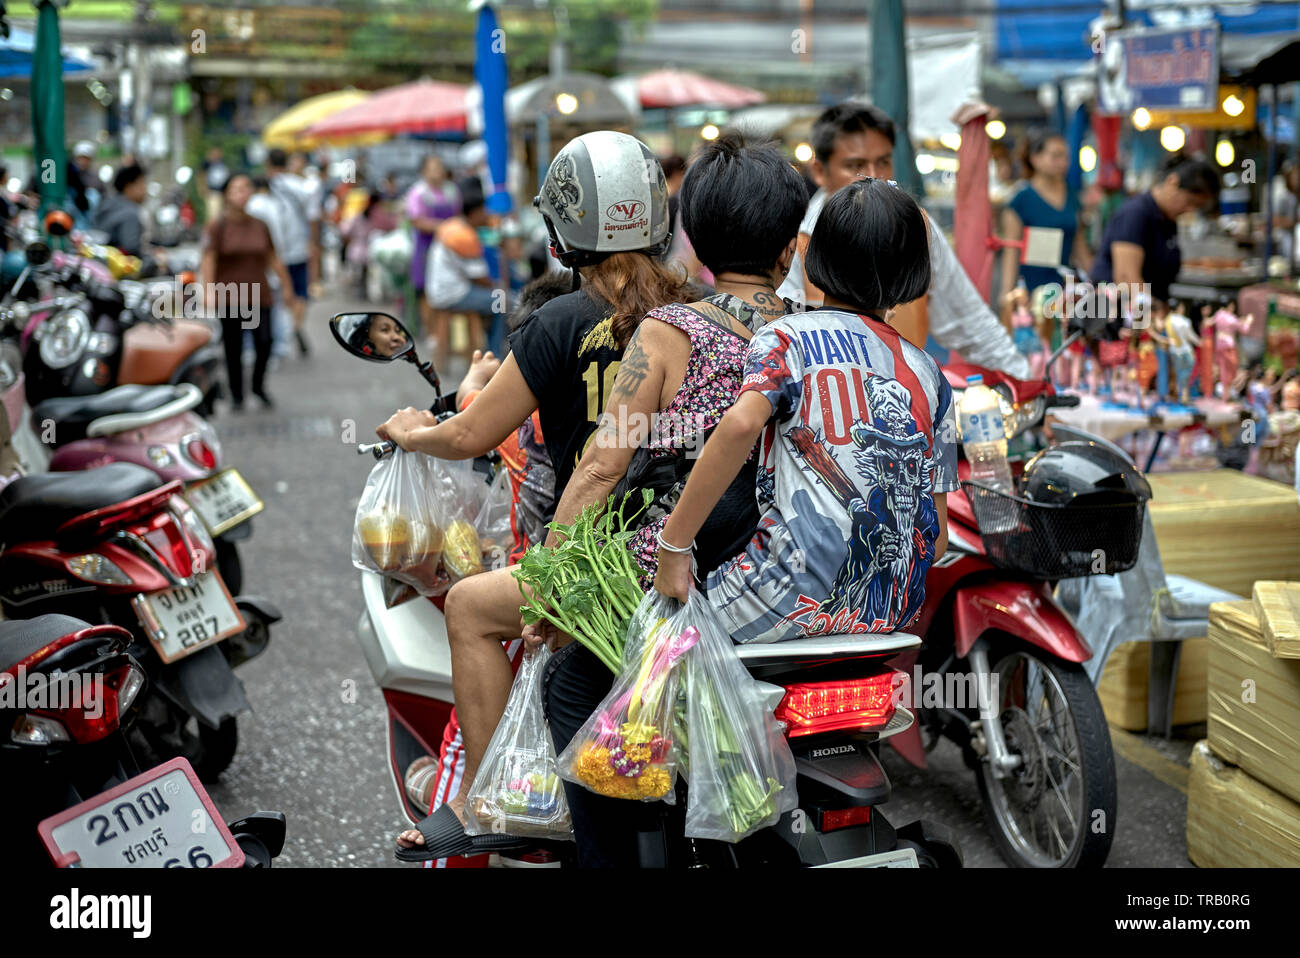 Thailand family motorbike. Food shopping with three generations of women  riding a motorcycle through a street market Stock Photo - Alamy